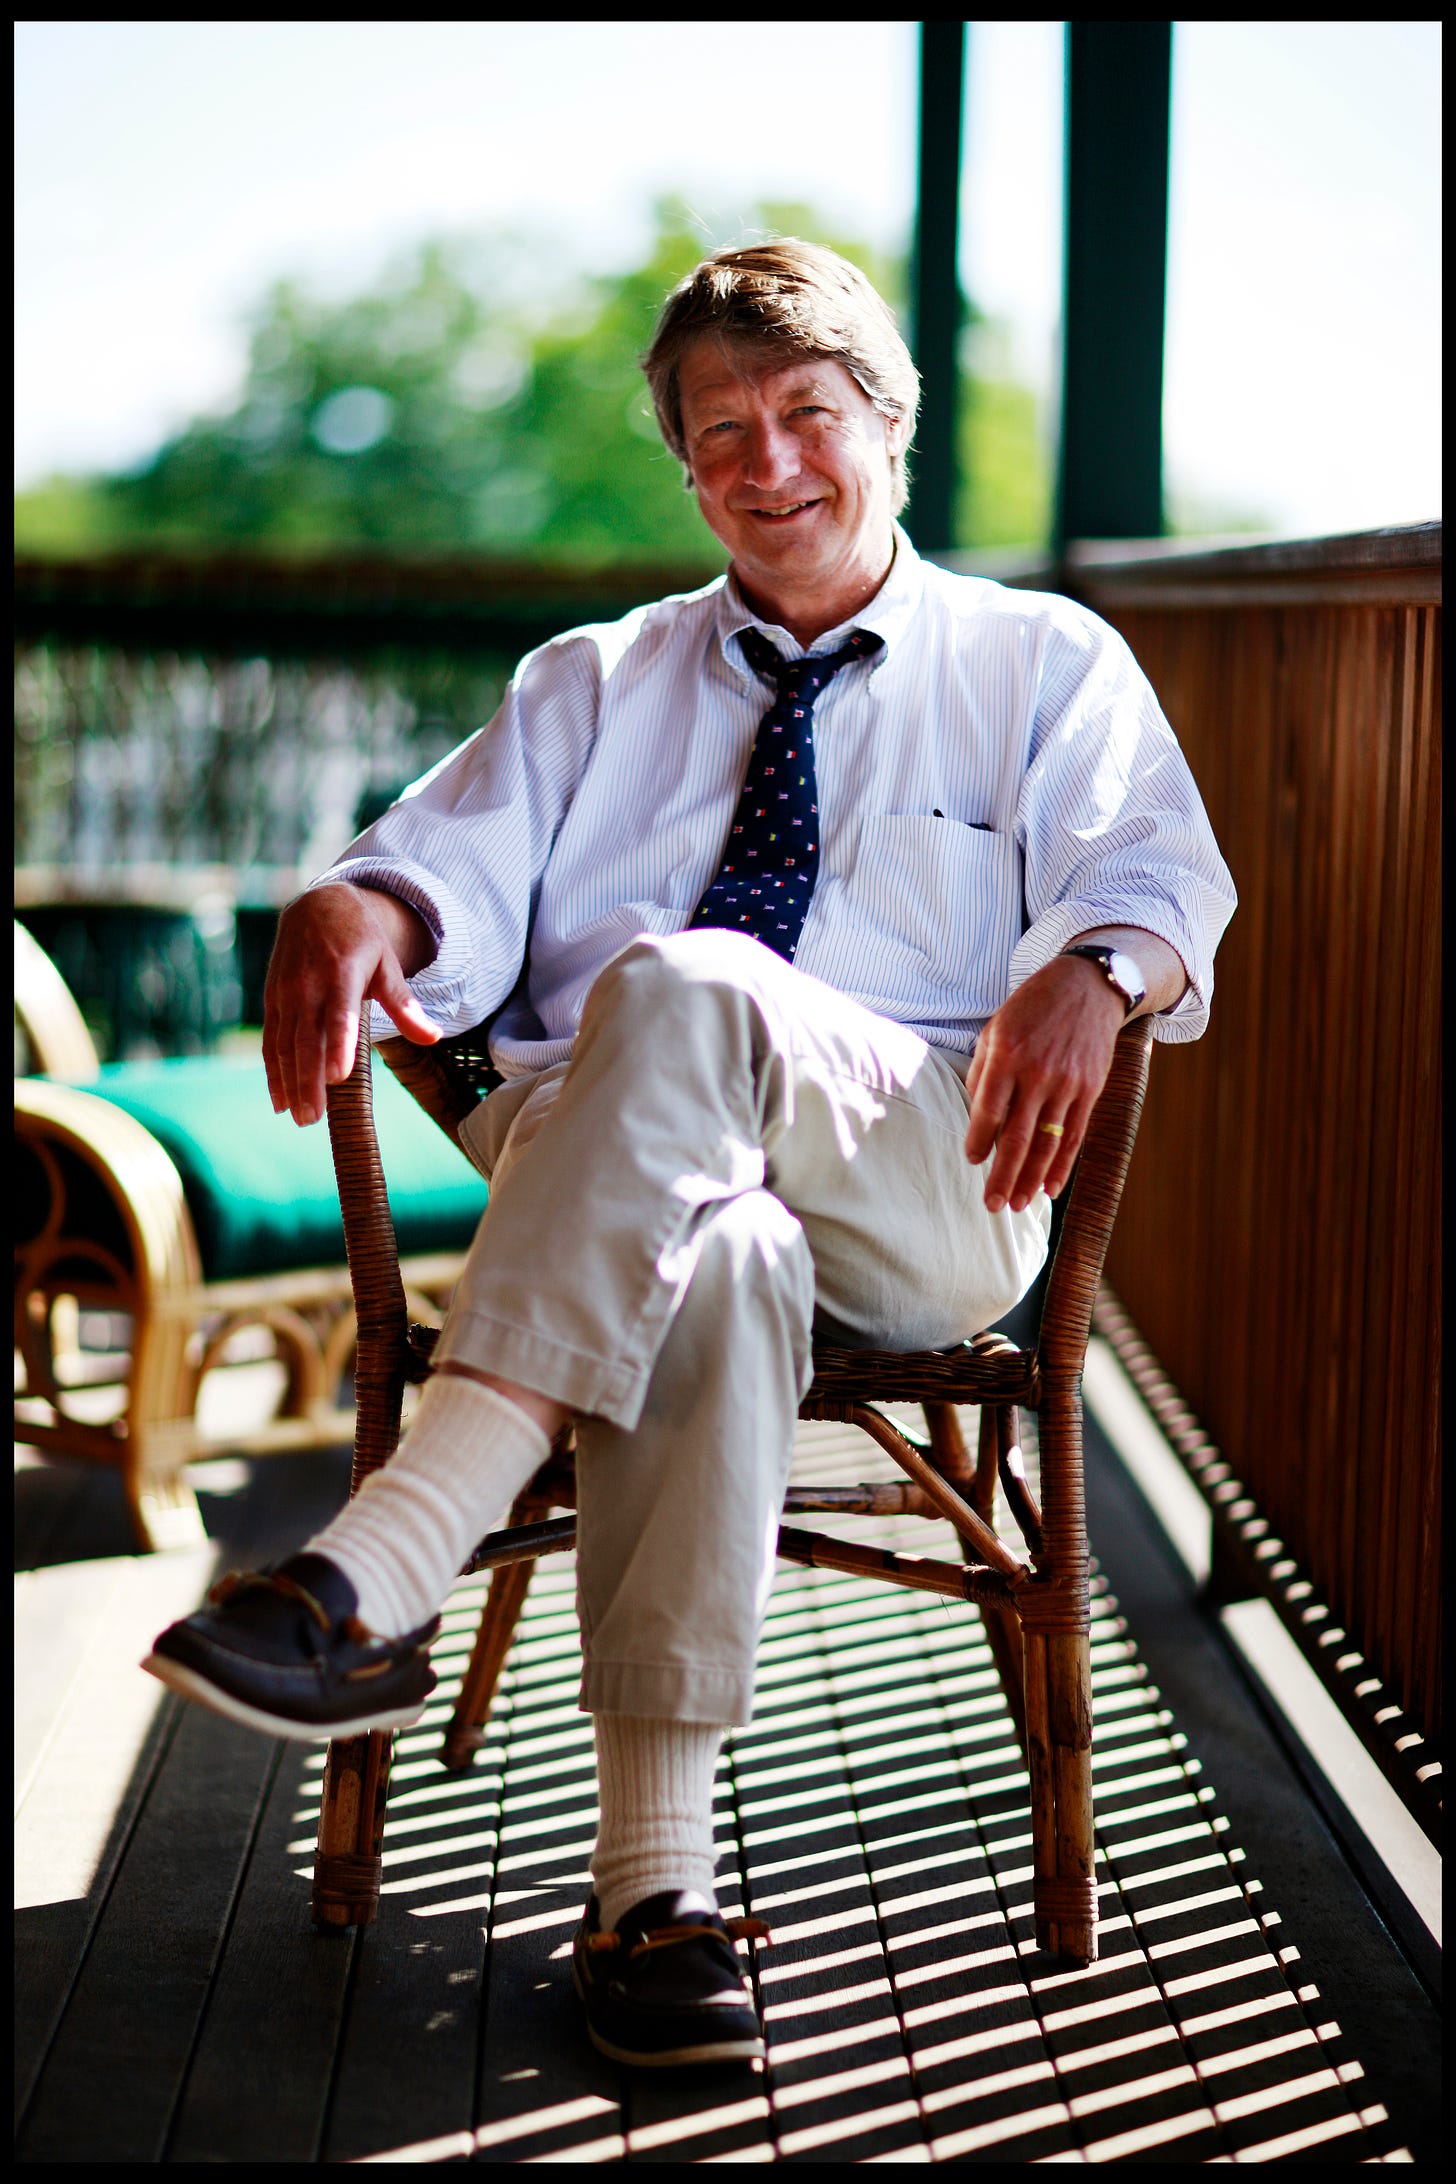 A portrait of author P.J.O'Rourke, photographed at home in Sharon, New Hampshire. | Location: Sharon, New Hampshire, USA. (Photo by David Howells/Corbis via Getty Images)